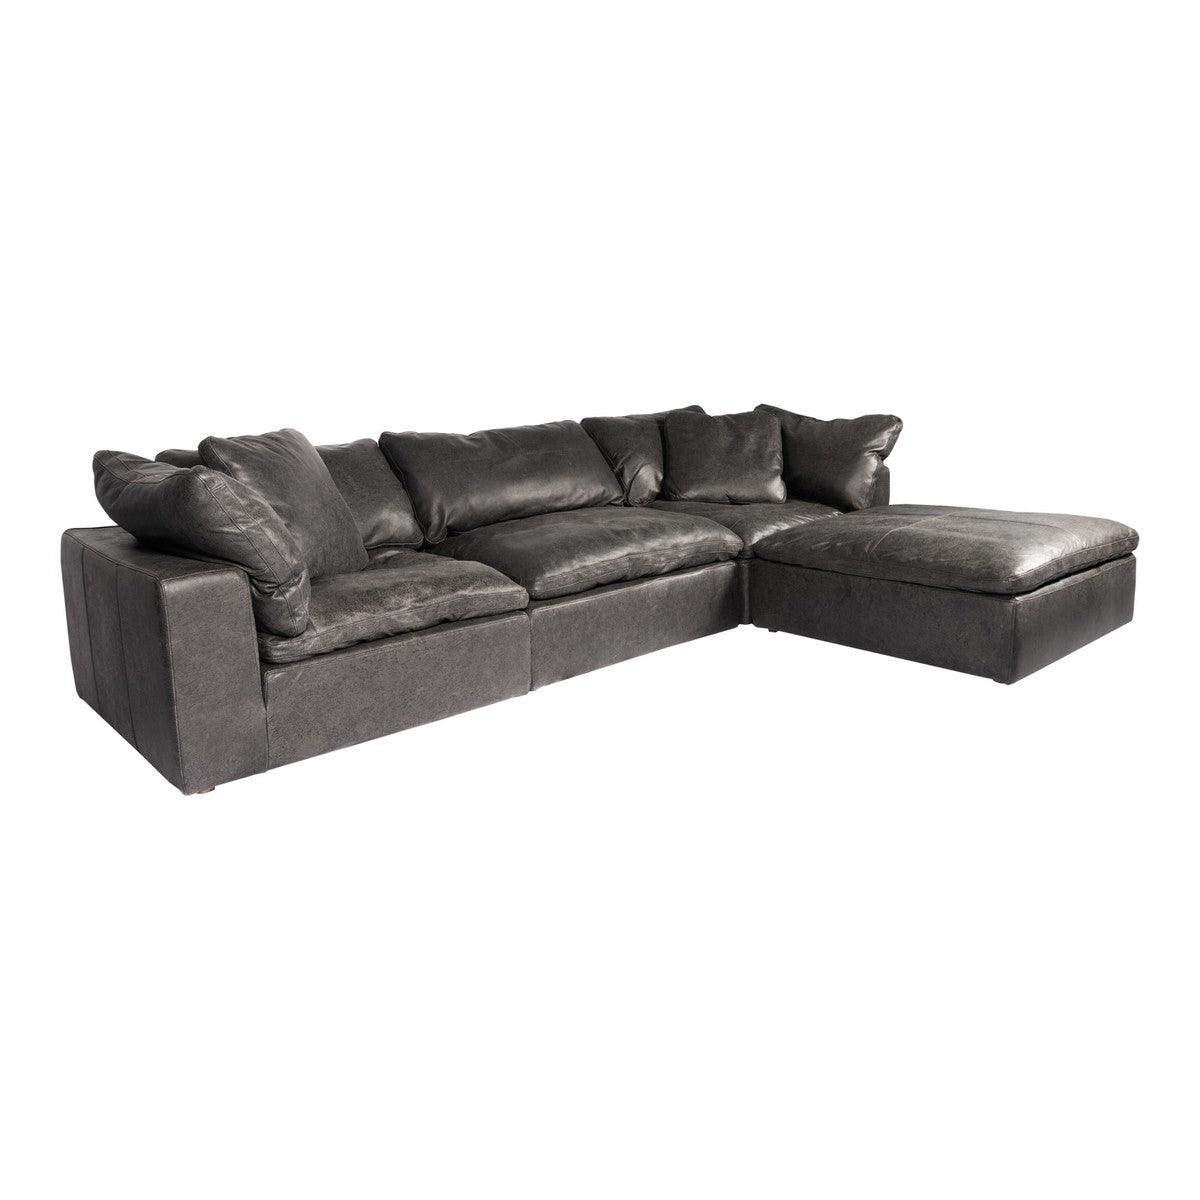 Moe's Home Collection Clay Lounge Modular Sectional Nubuck Leather Black - YJ-1008-02